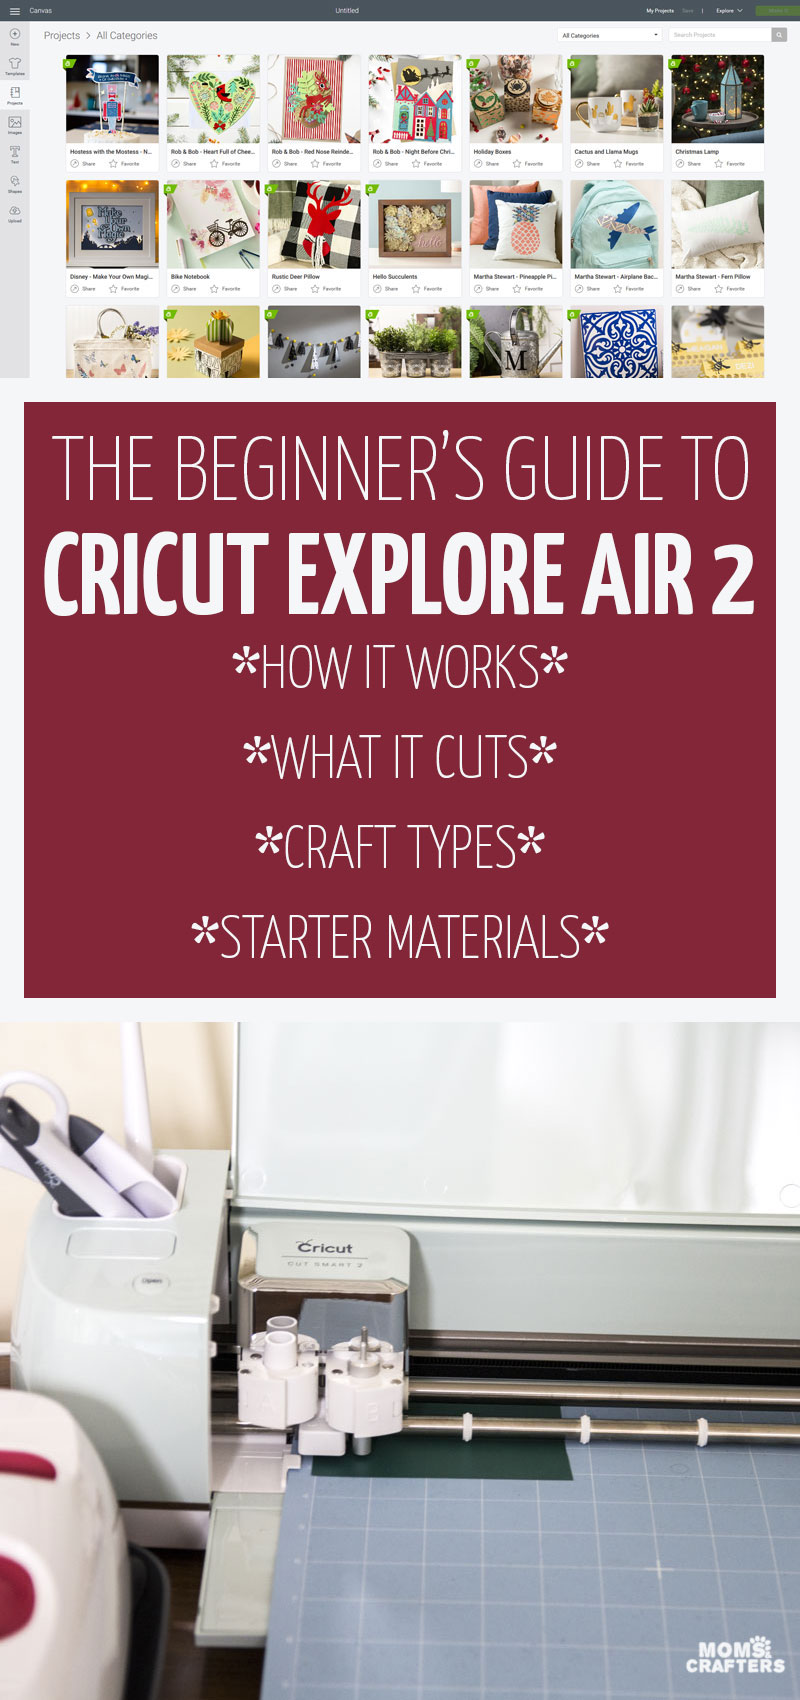 Click if you're thinking about buying a Cricut and need to know everything! This Cricut Explore Air 2 review and overview will teach you how it works, what it is, what you can cut with the cricut machine, what types of crafts you can make with it, and which materials and tools you need to begin with. It's the ultimate guide to Cricut for beginners!